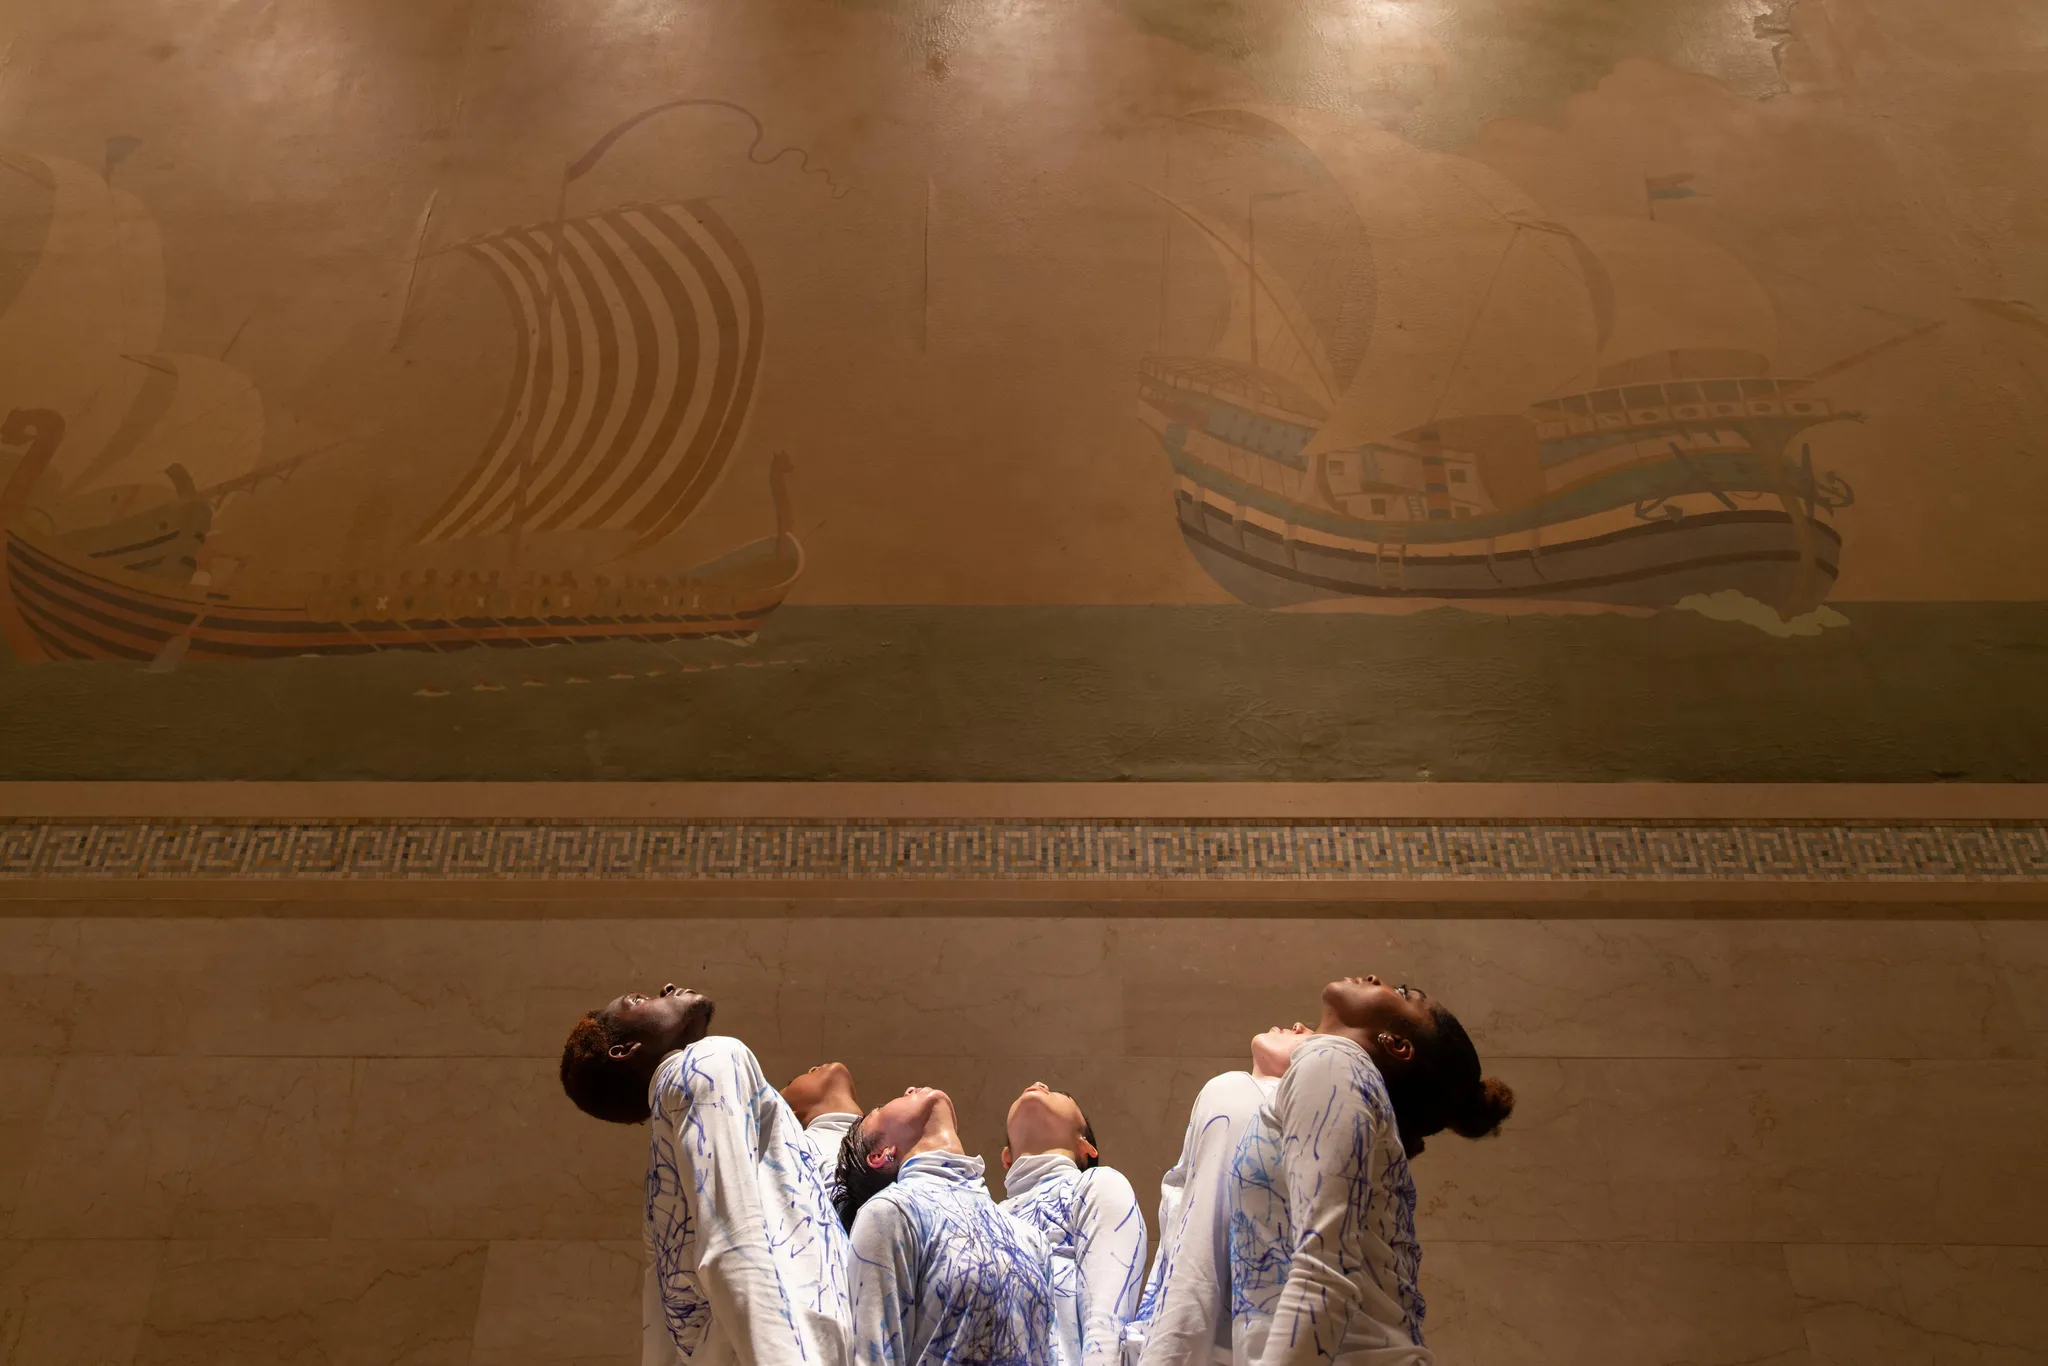 Six performers from diverse ethnic backgrounds, gazing upward in front of a wall painting depicting two ancient ships